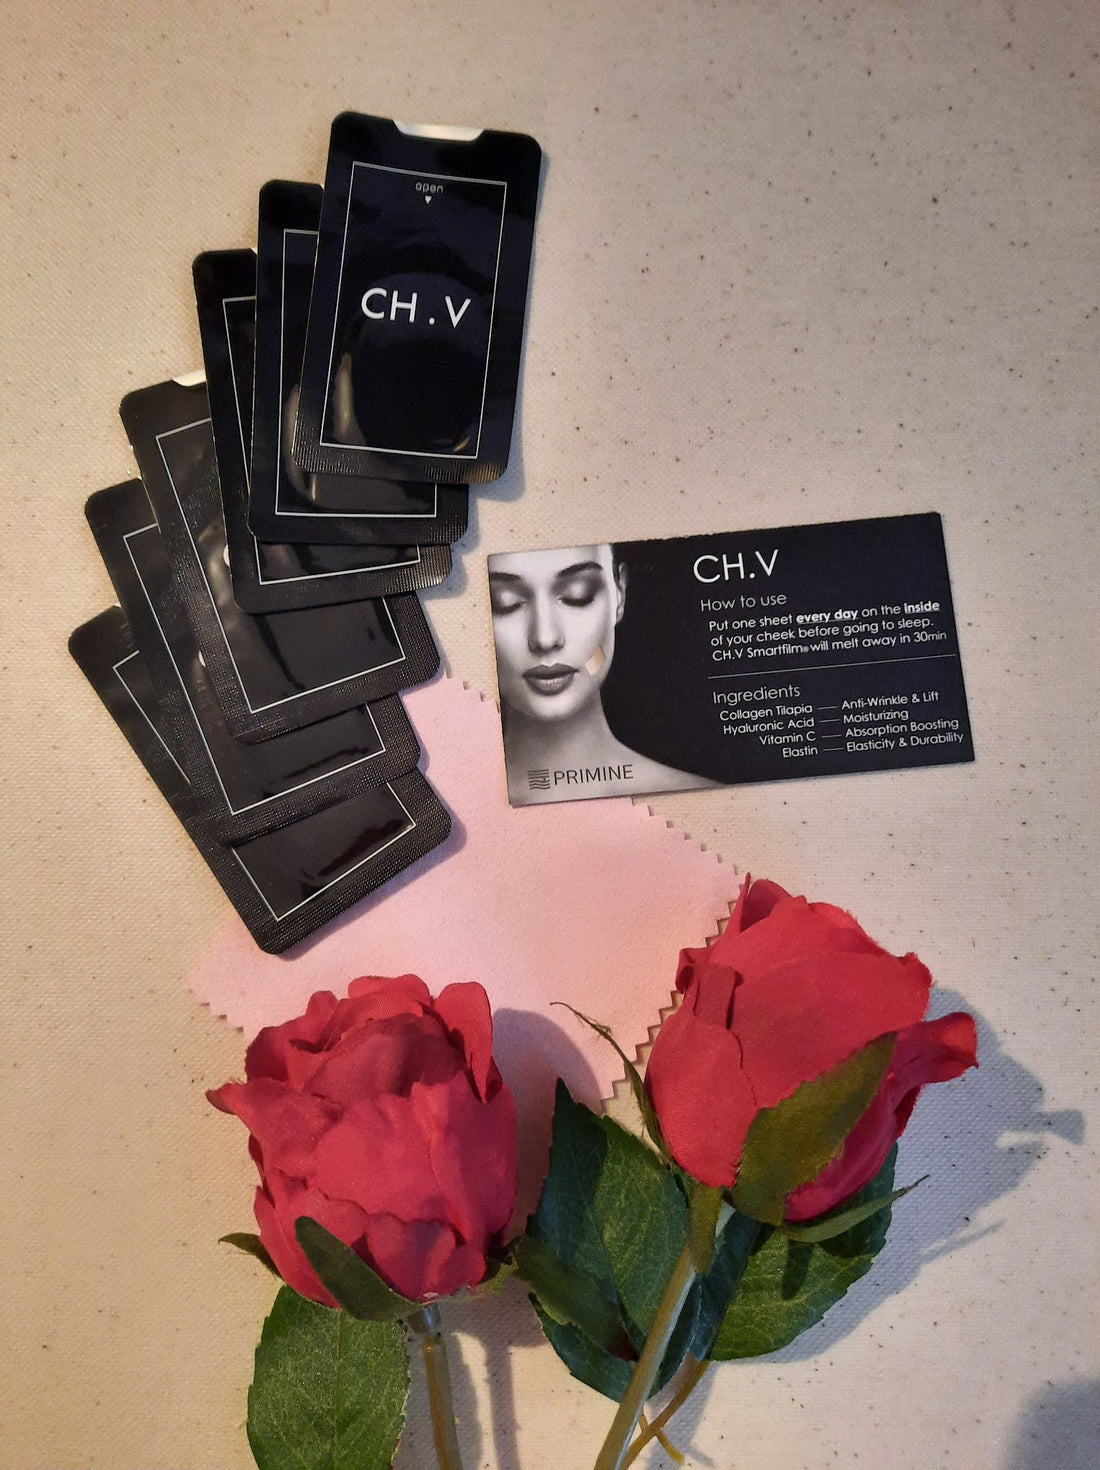 seadbeady review of CHV smartfilm with collagen hyaluronic acid anti aging skin repair anti wrinkle powder pill